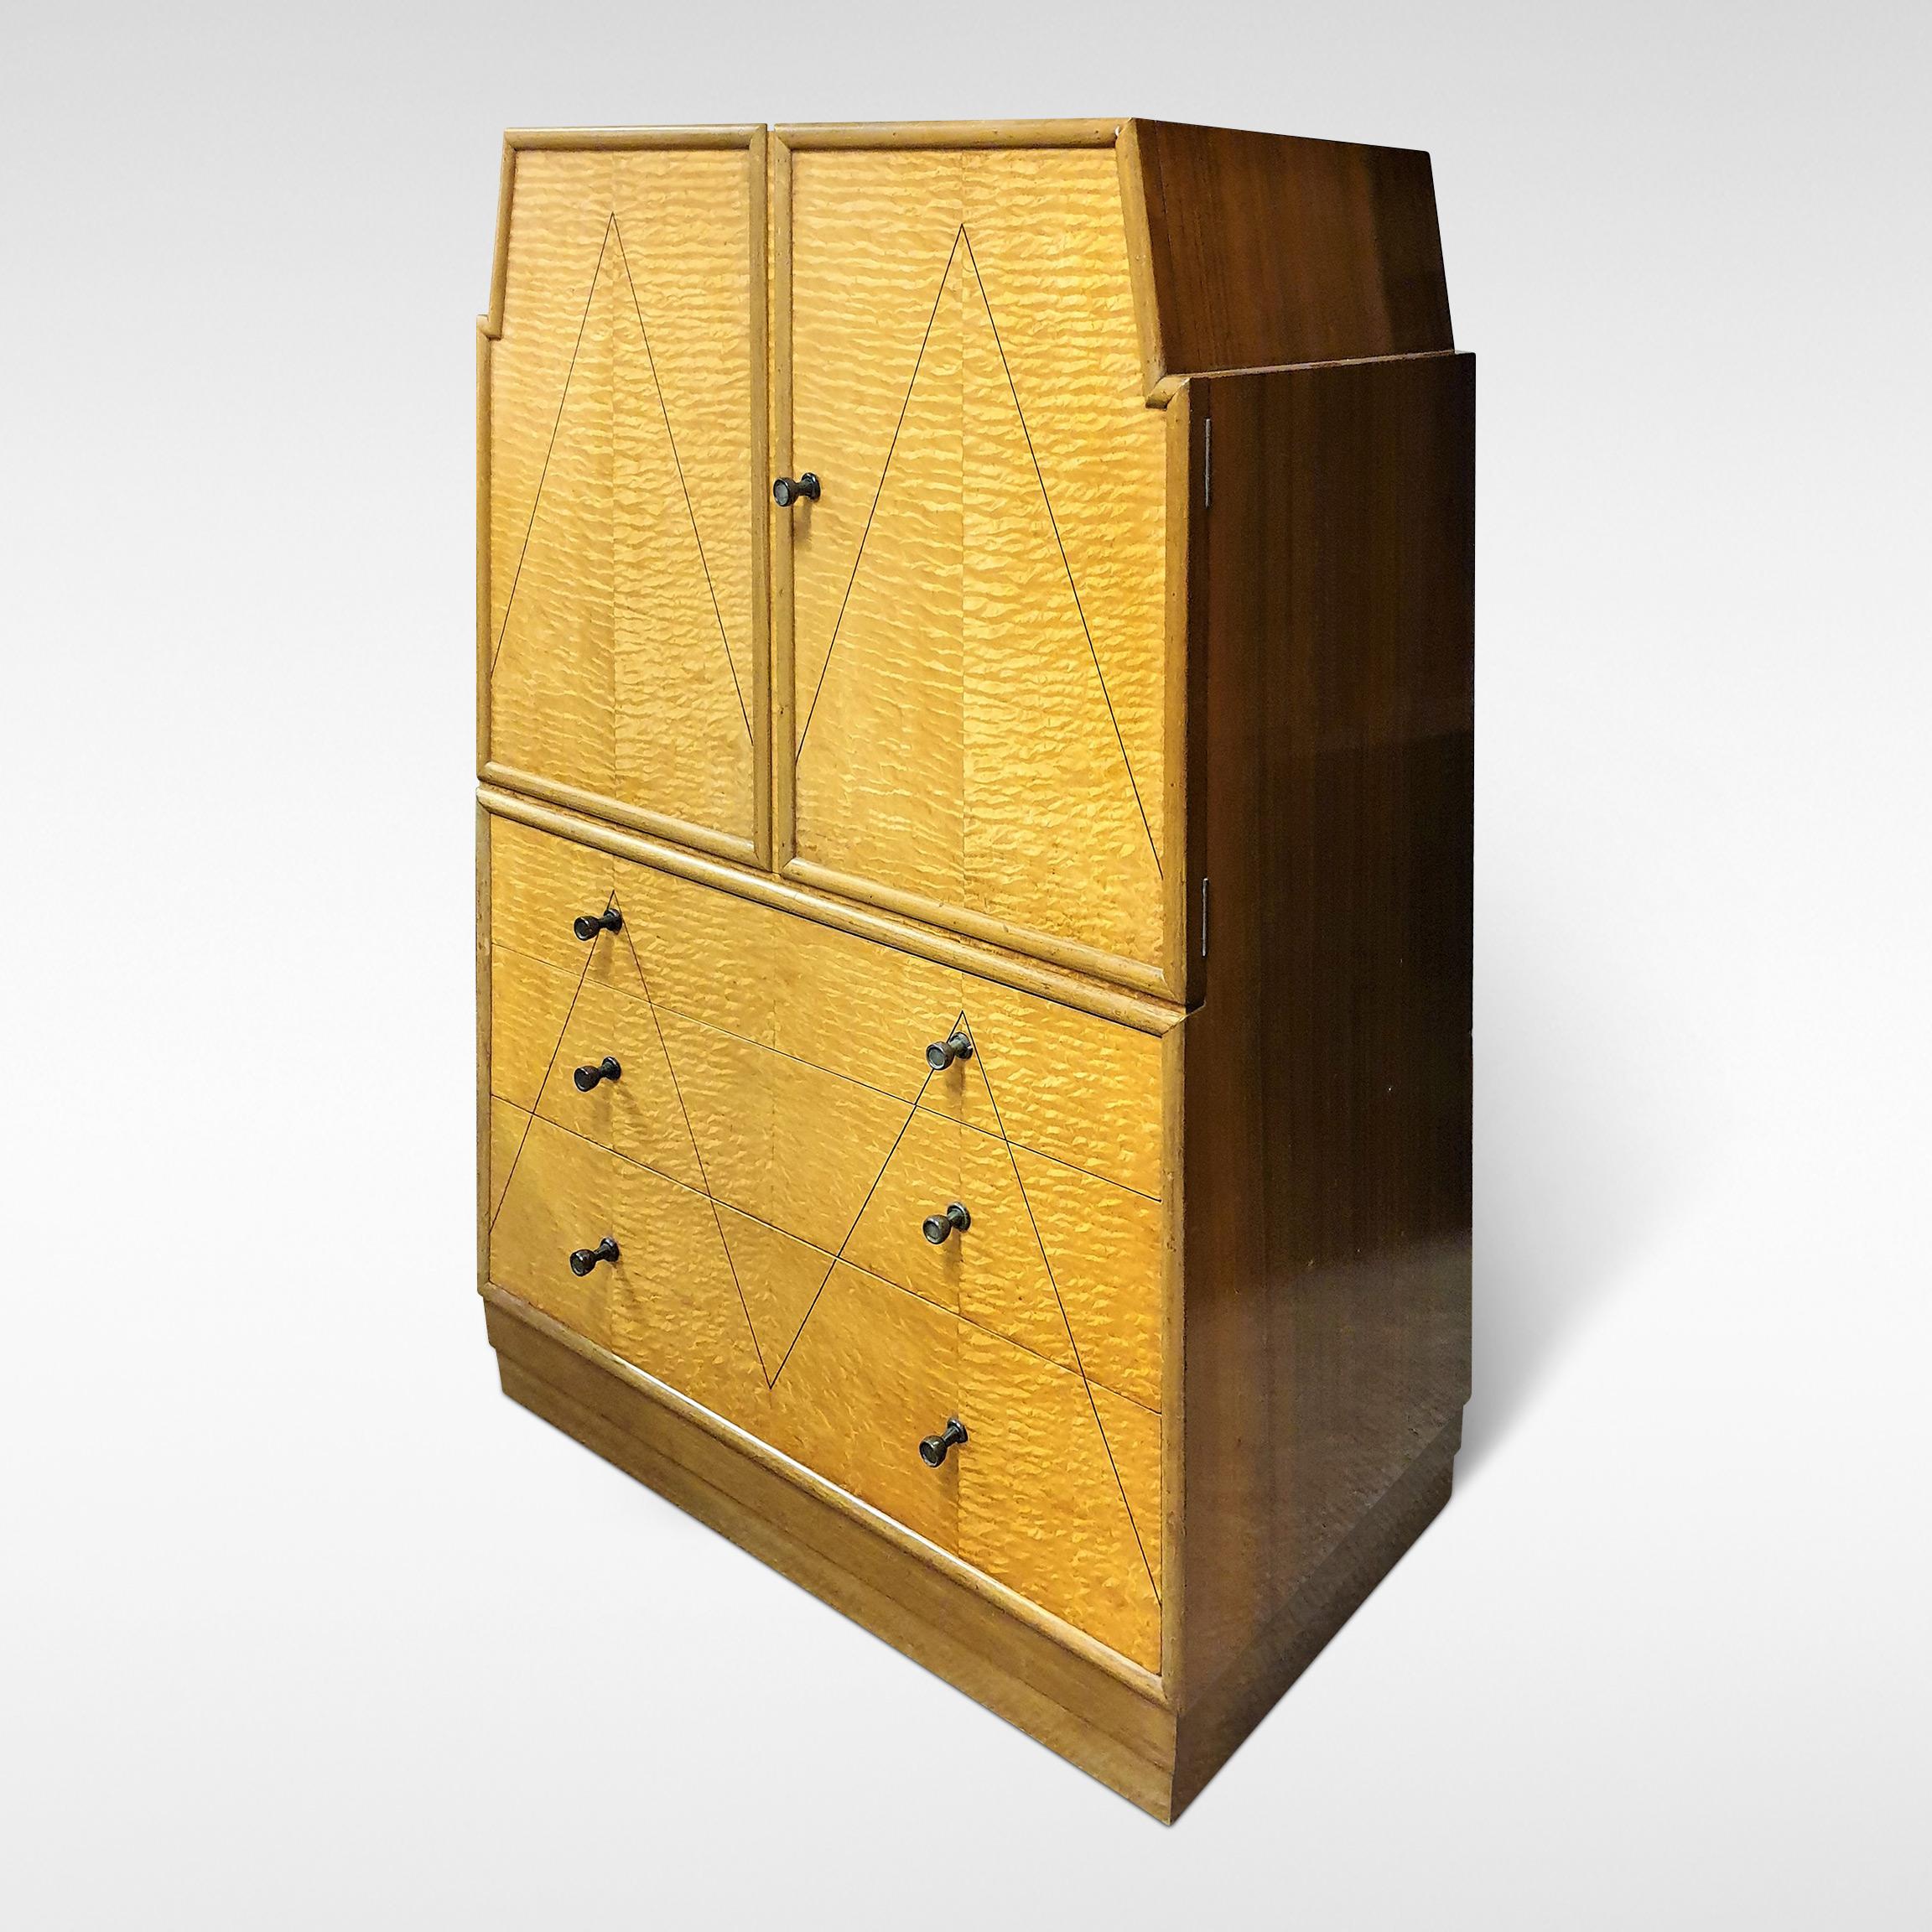 This modernist Skyscraper design cabinet with drawers from the Art Deco period is attributed to sir Ambrose heal. It has three drawers with a cupboard over in Hungarian ash veneers, with walnut to the top and sides, circa 1935.

A bedroom suite to